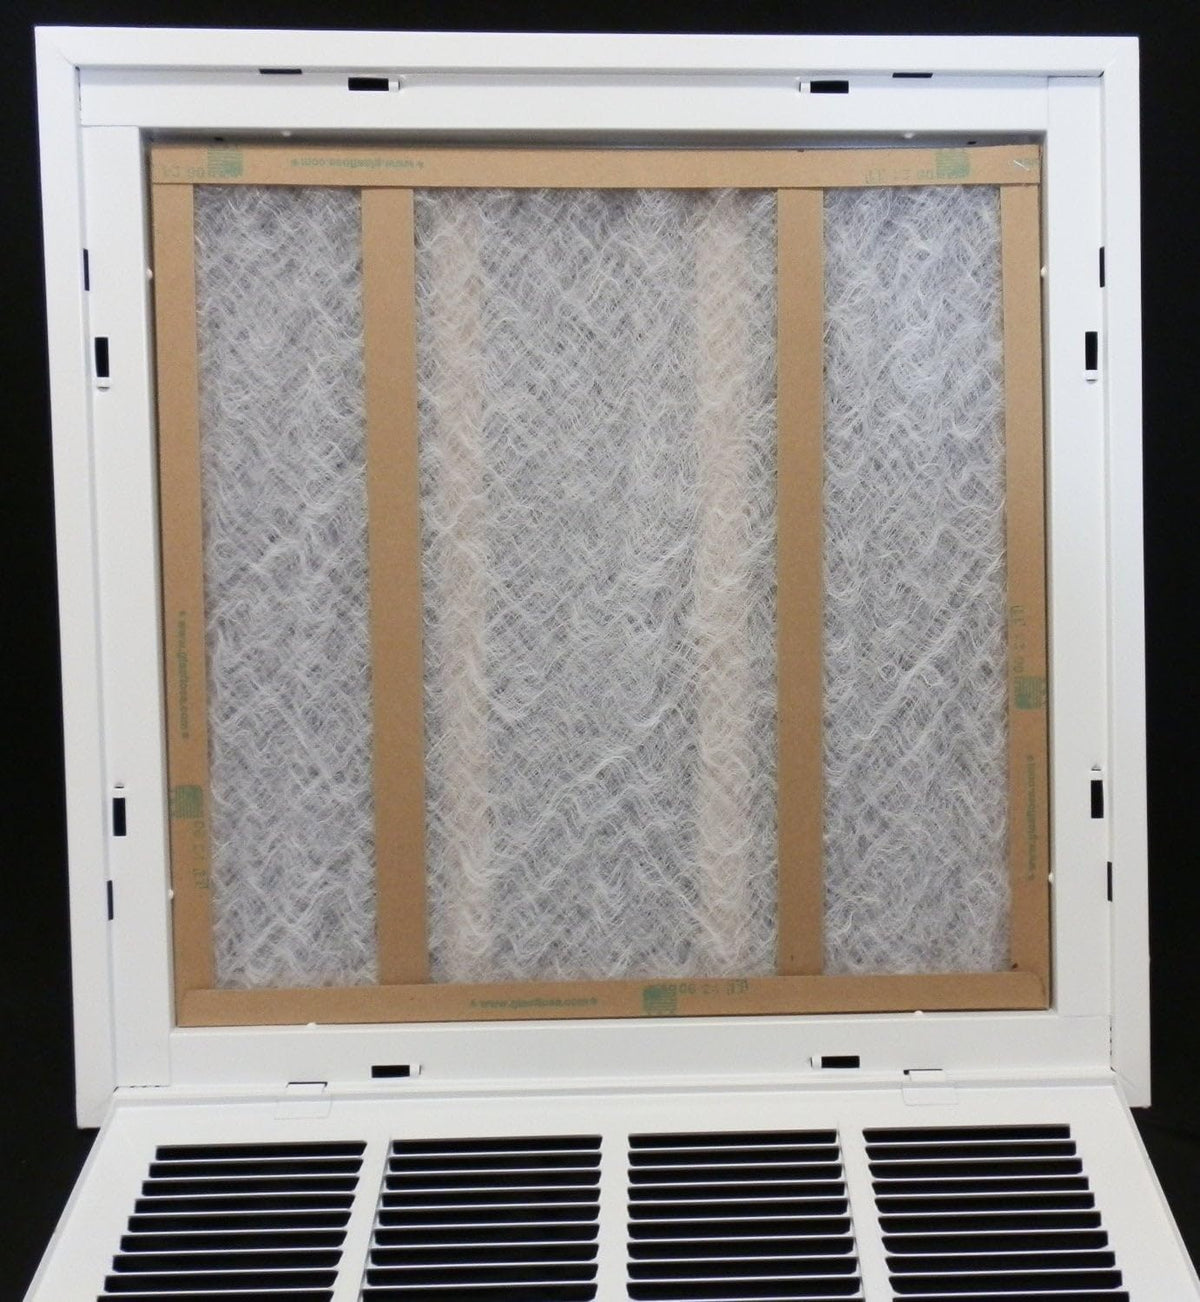 20&quot; X 14&quot; Steel Return Air Filter Grille for 1&quot; Filter - Removable Frame - * Filter Included * [Outer Dimensions: 22 5/8&quot; X 16 5/8&quot;]